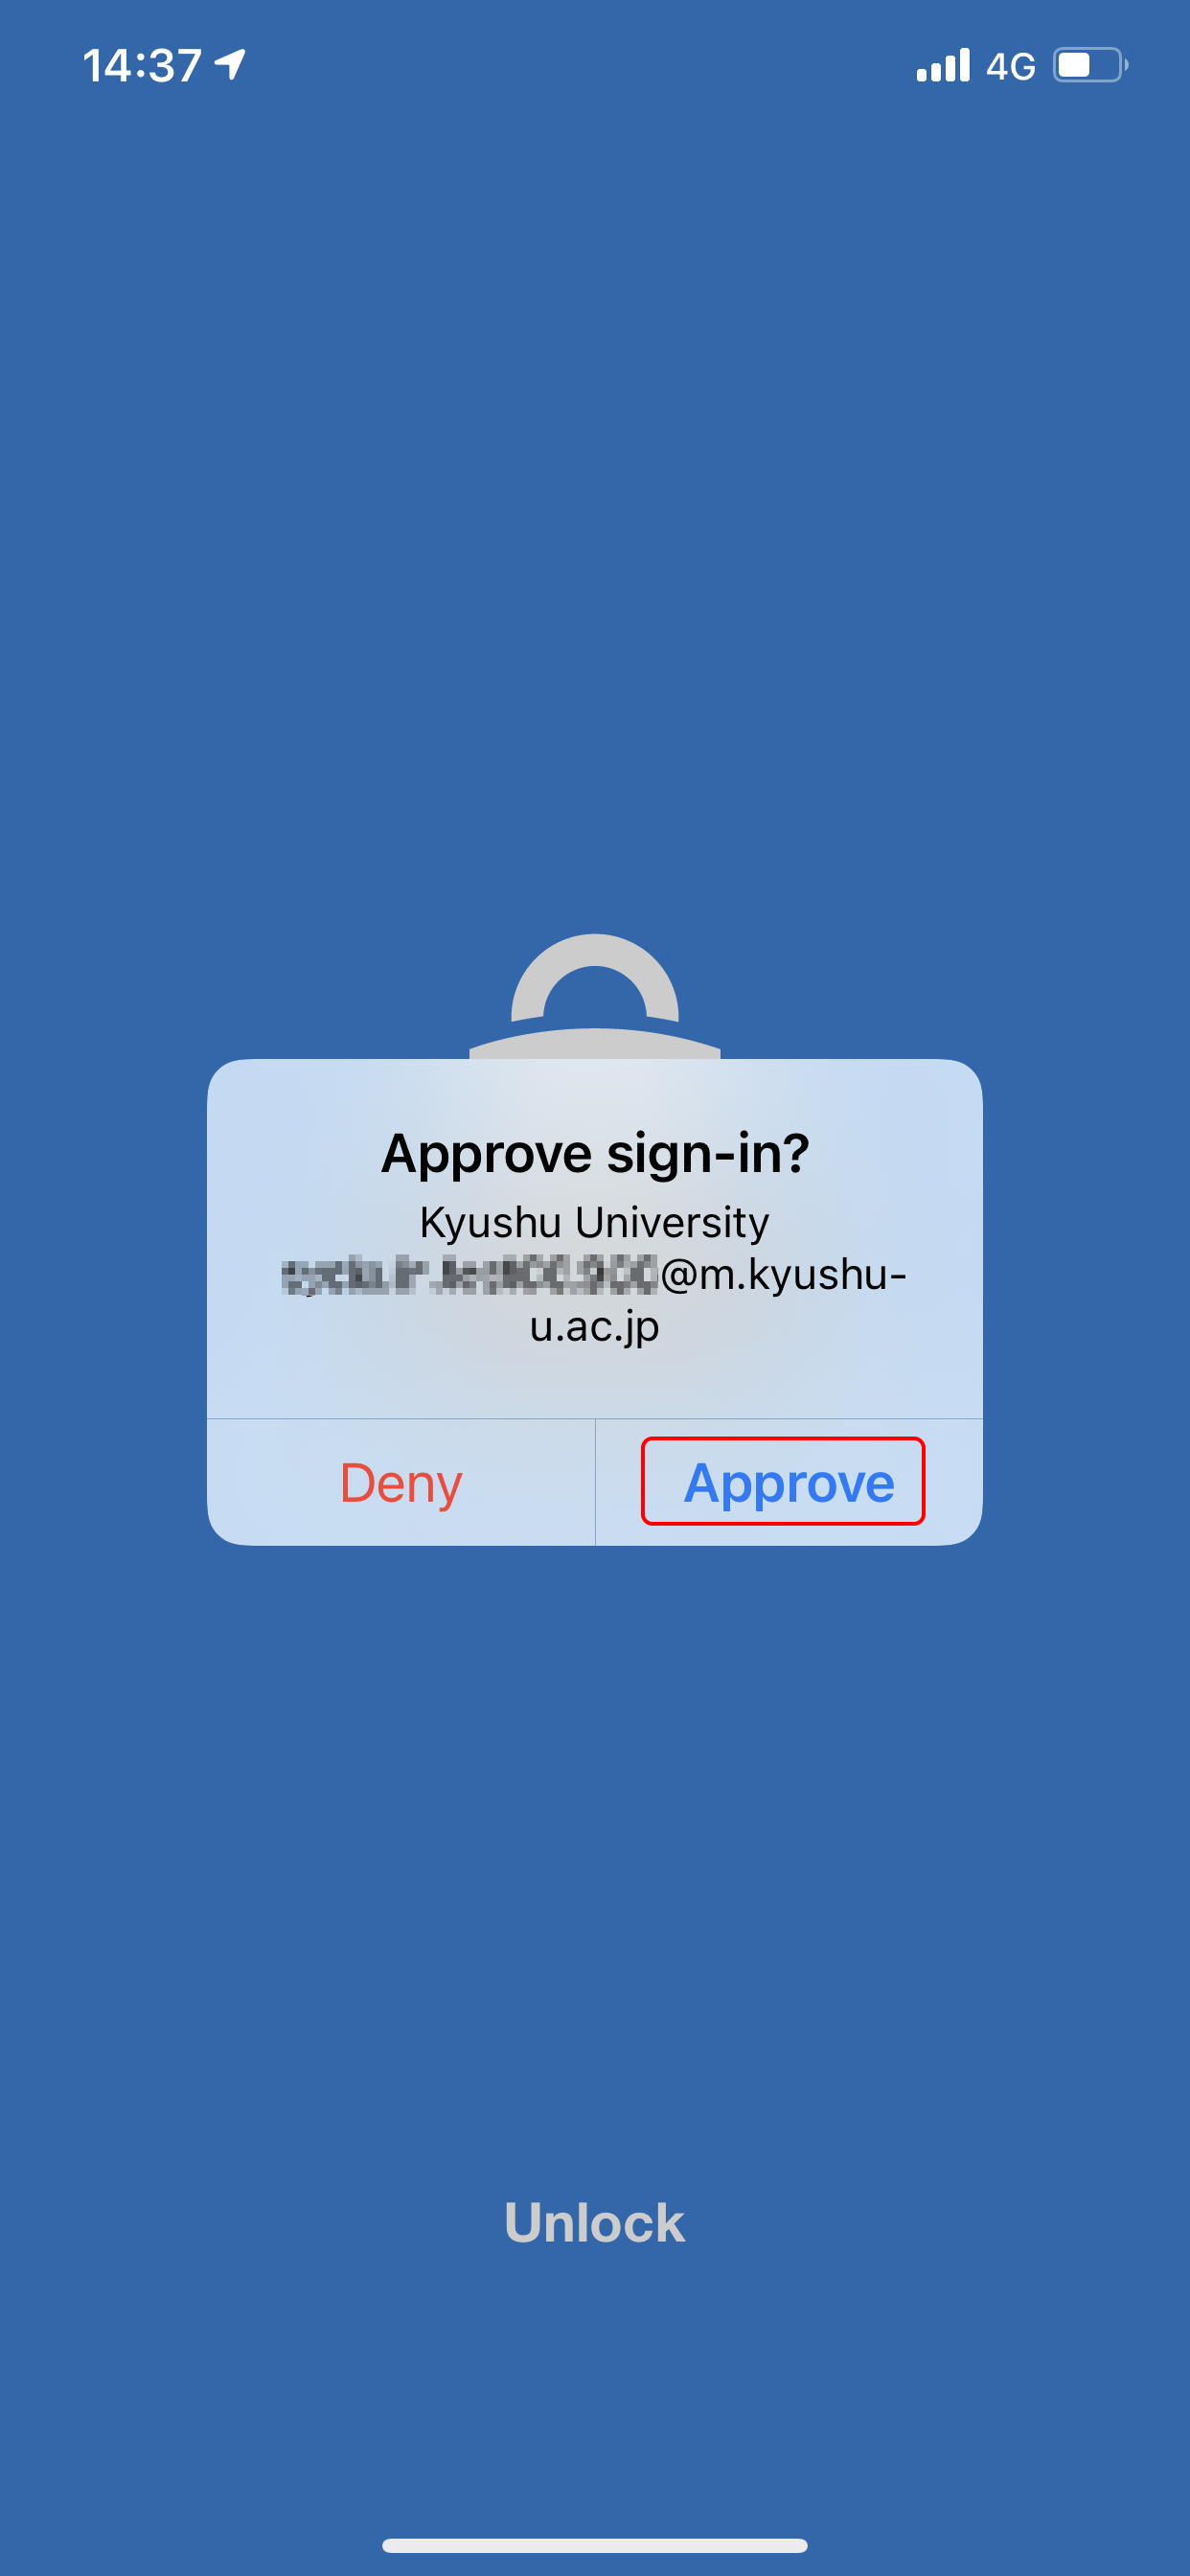 Approve sign-in